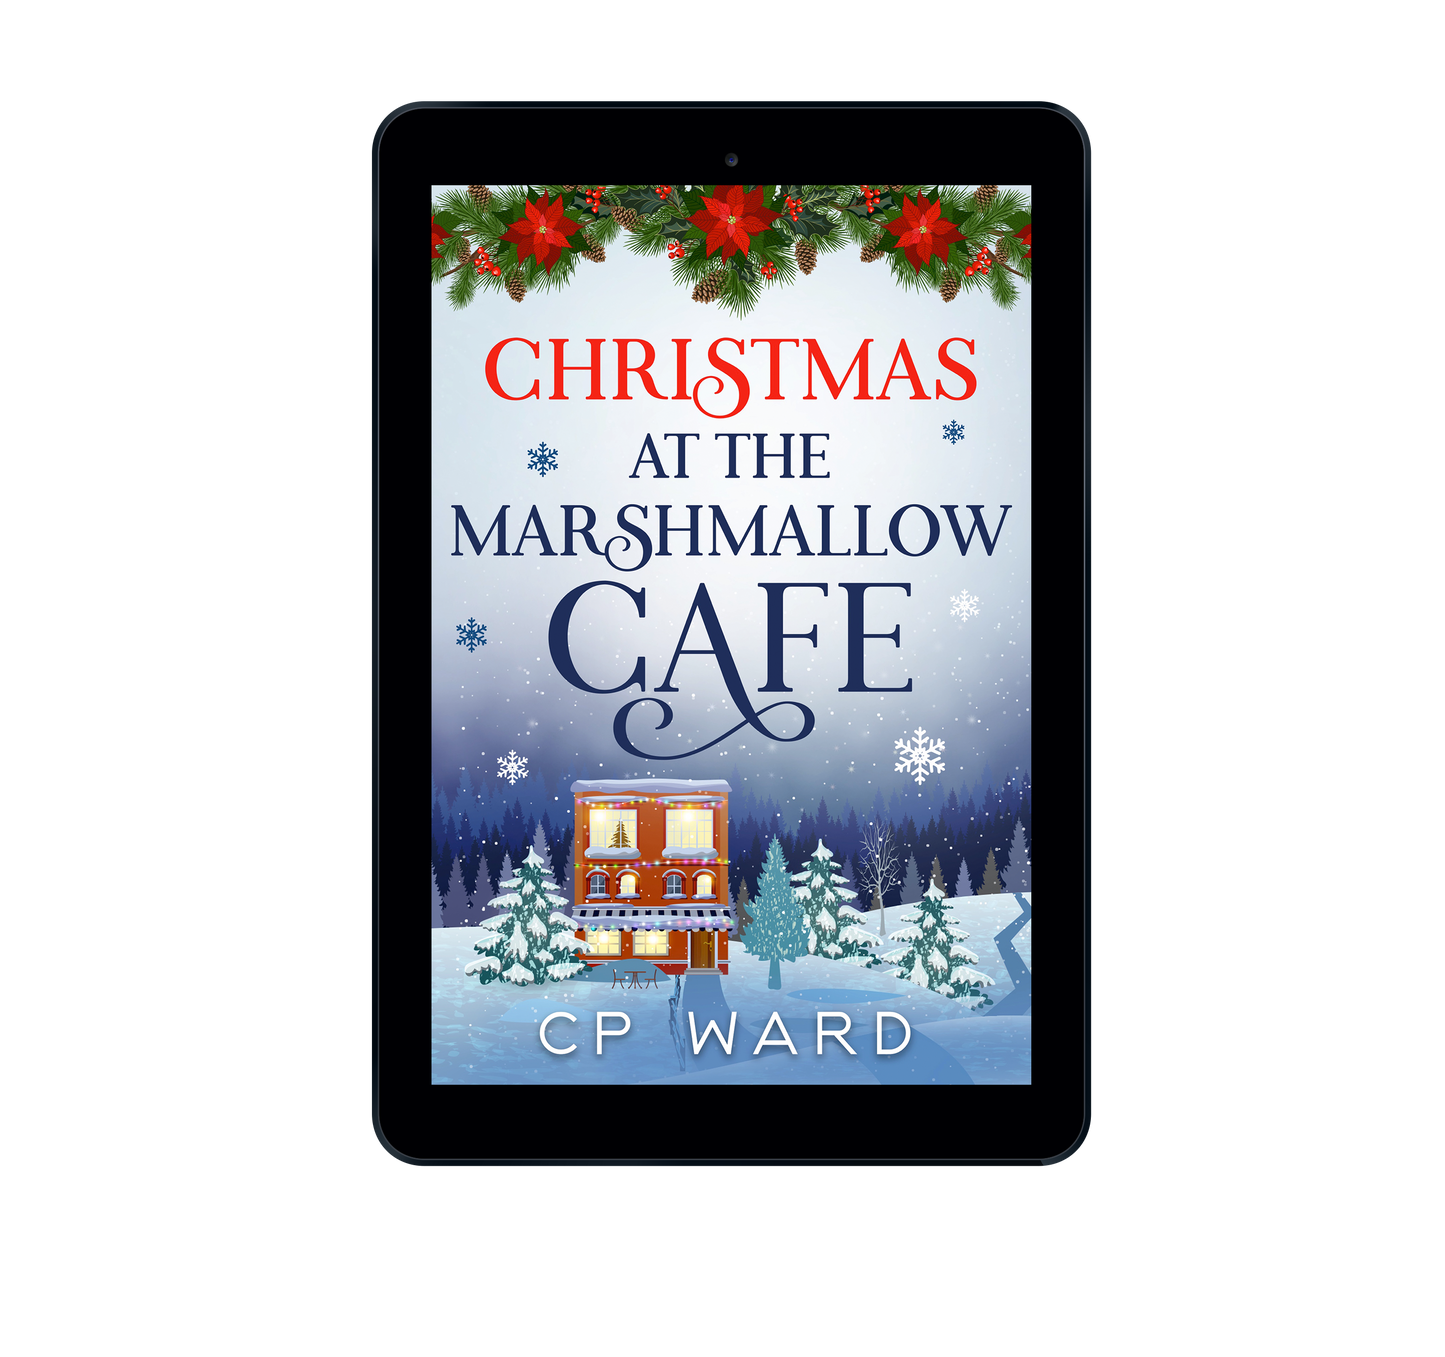 Christmas at the Marshmallow Cafe